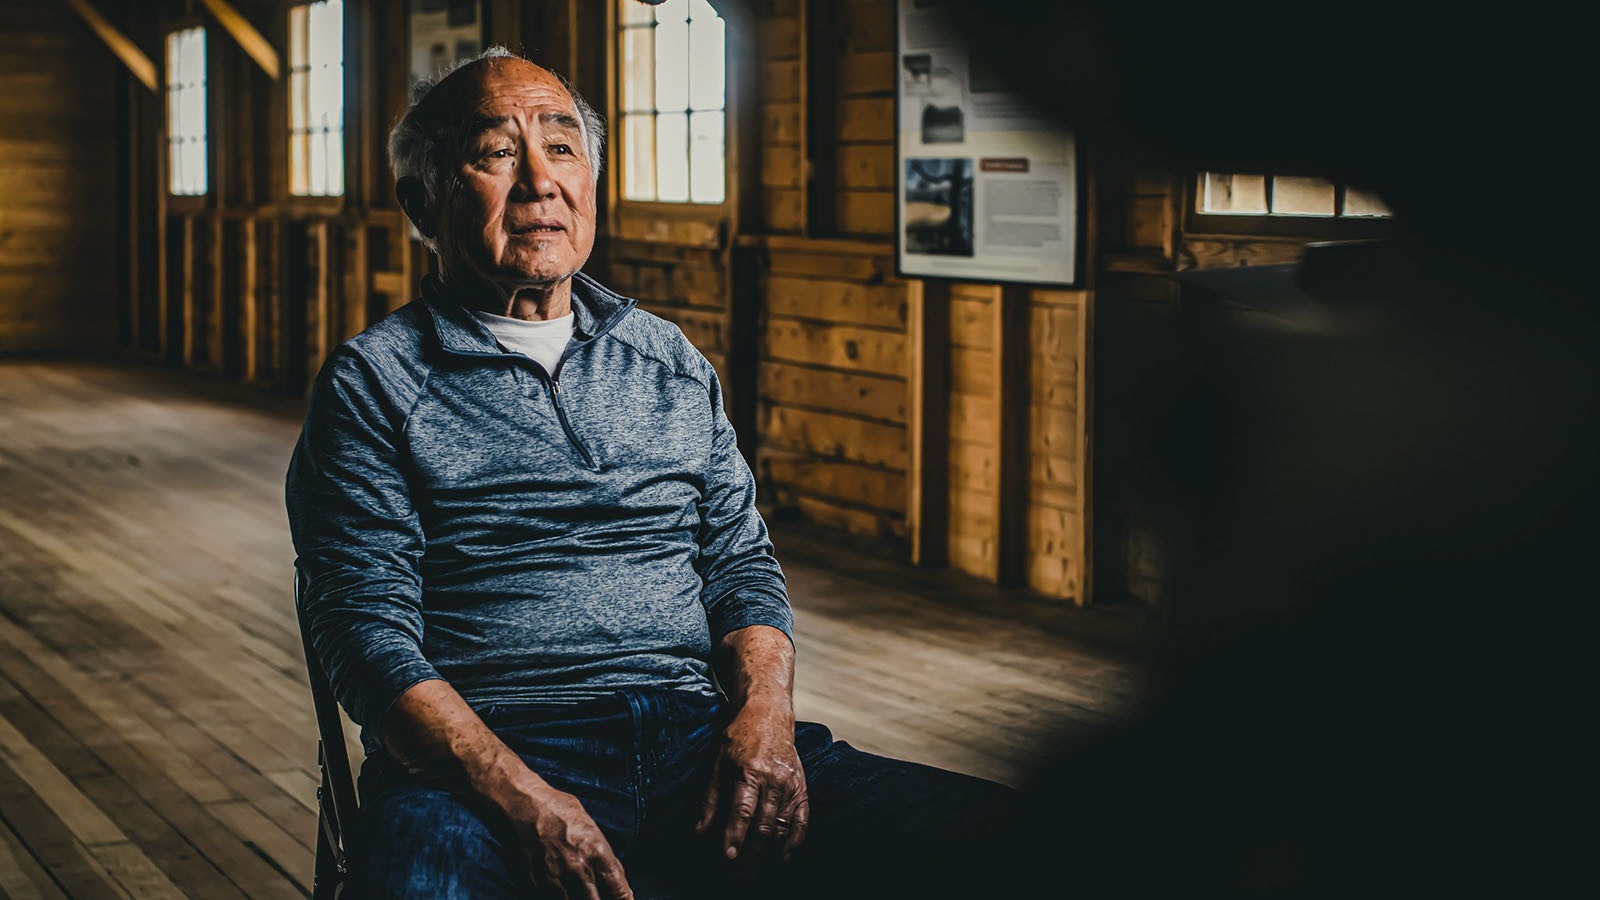 Rodney Fujita being interviewed at the Heart Mountain Interpretive Center for the NFL documentary "9066: Fear, Football, and the Theft of Freedom." Fujita was born at the Gila River War Relocation Center in Arizona.